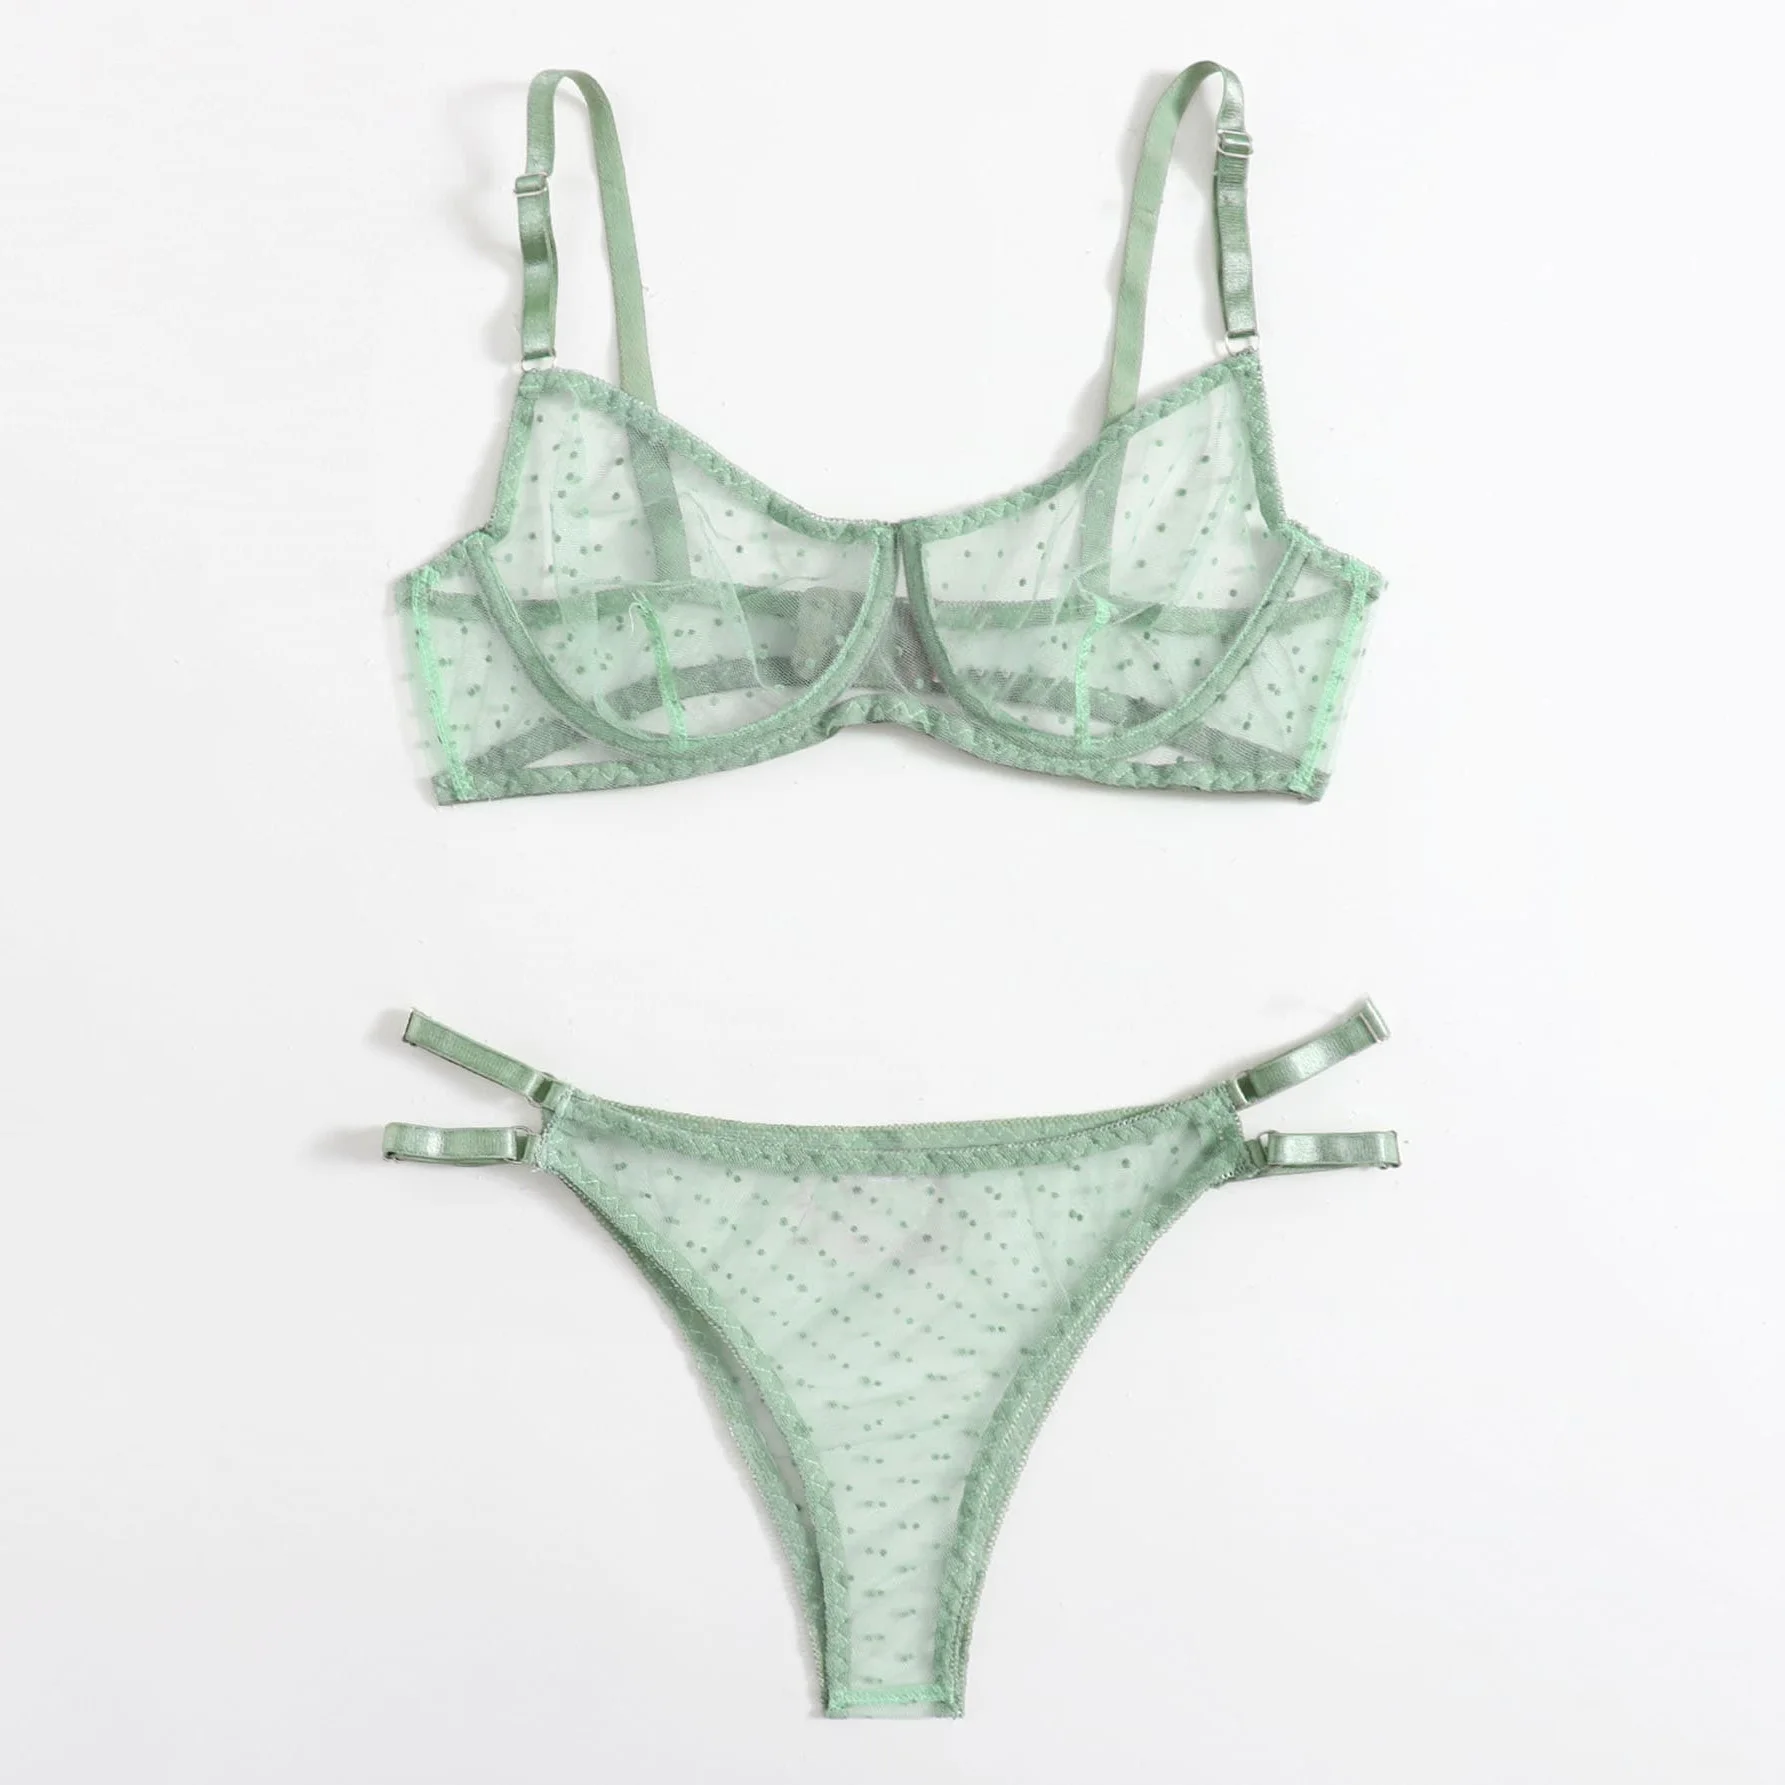 

Dot Mesh Lace Lingerie Set Underwire See Through Brassiere Sexy Underwear Bra and Panty Transparent Intimate